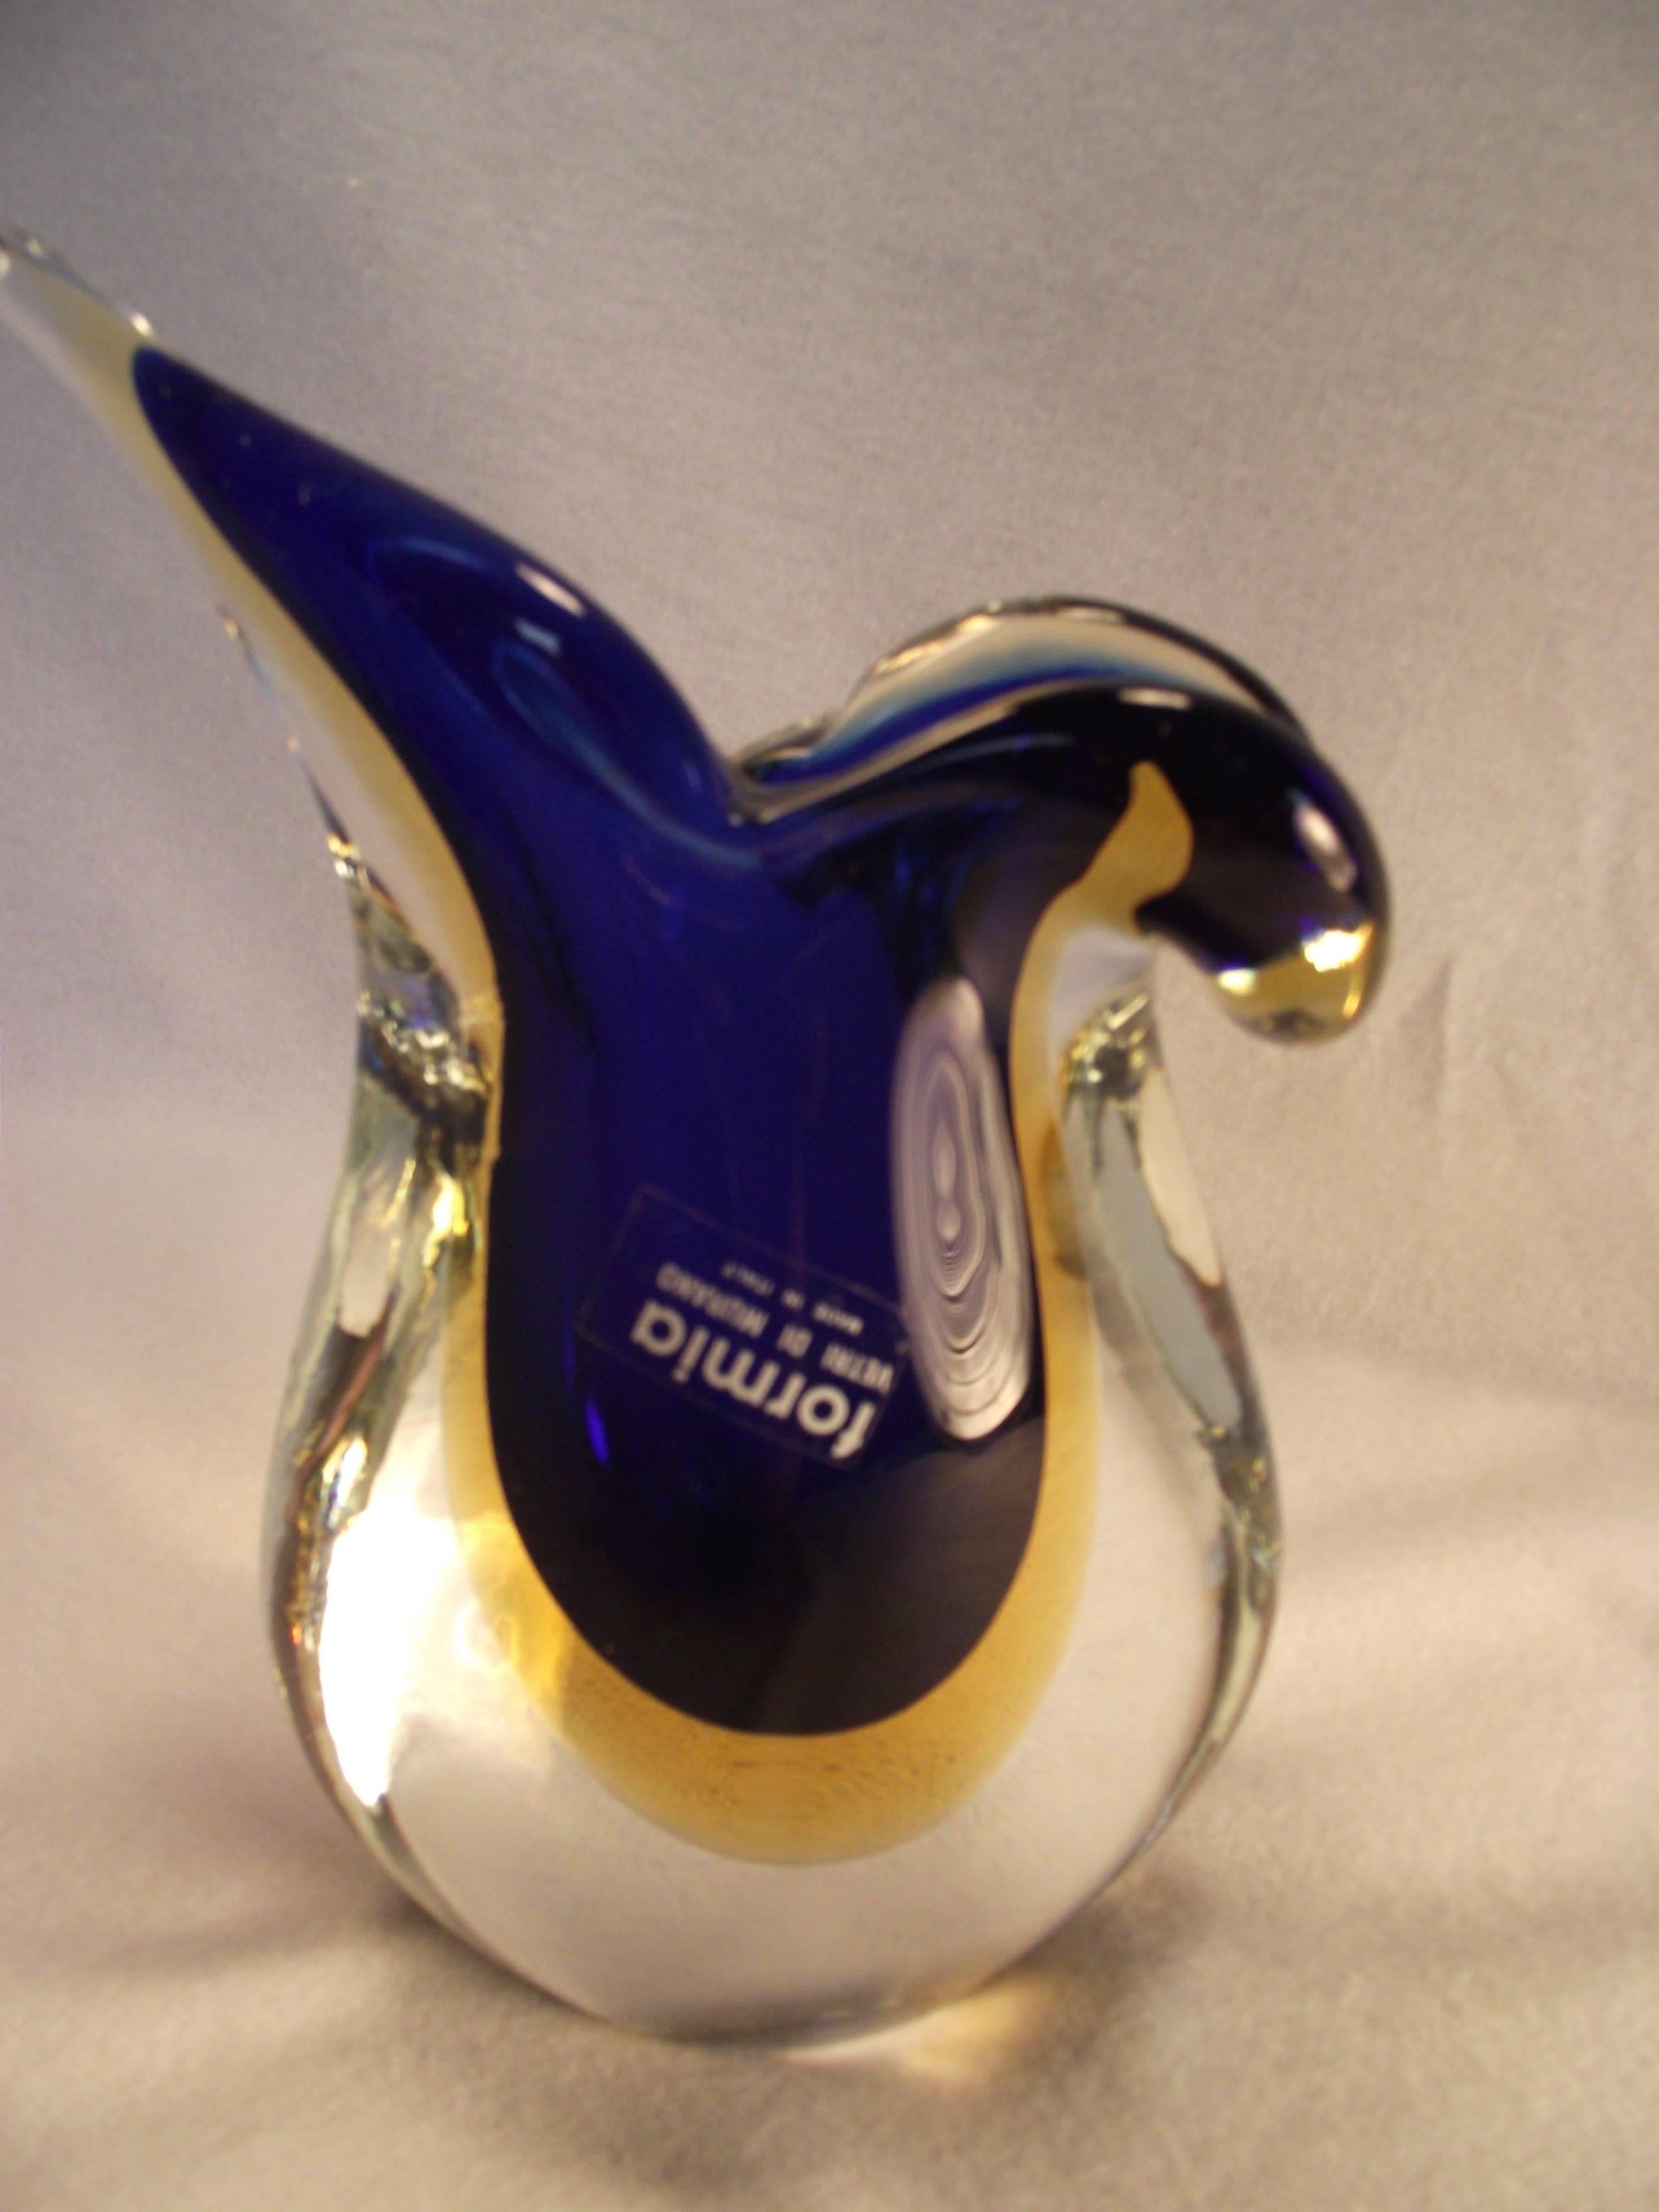 Very heavy clear, blue and gold Murano glass vase is a design by Vetri di Murano..